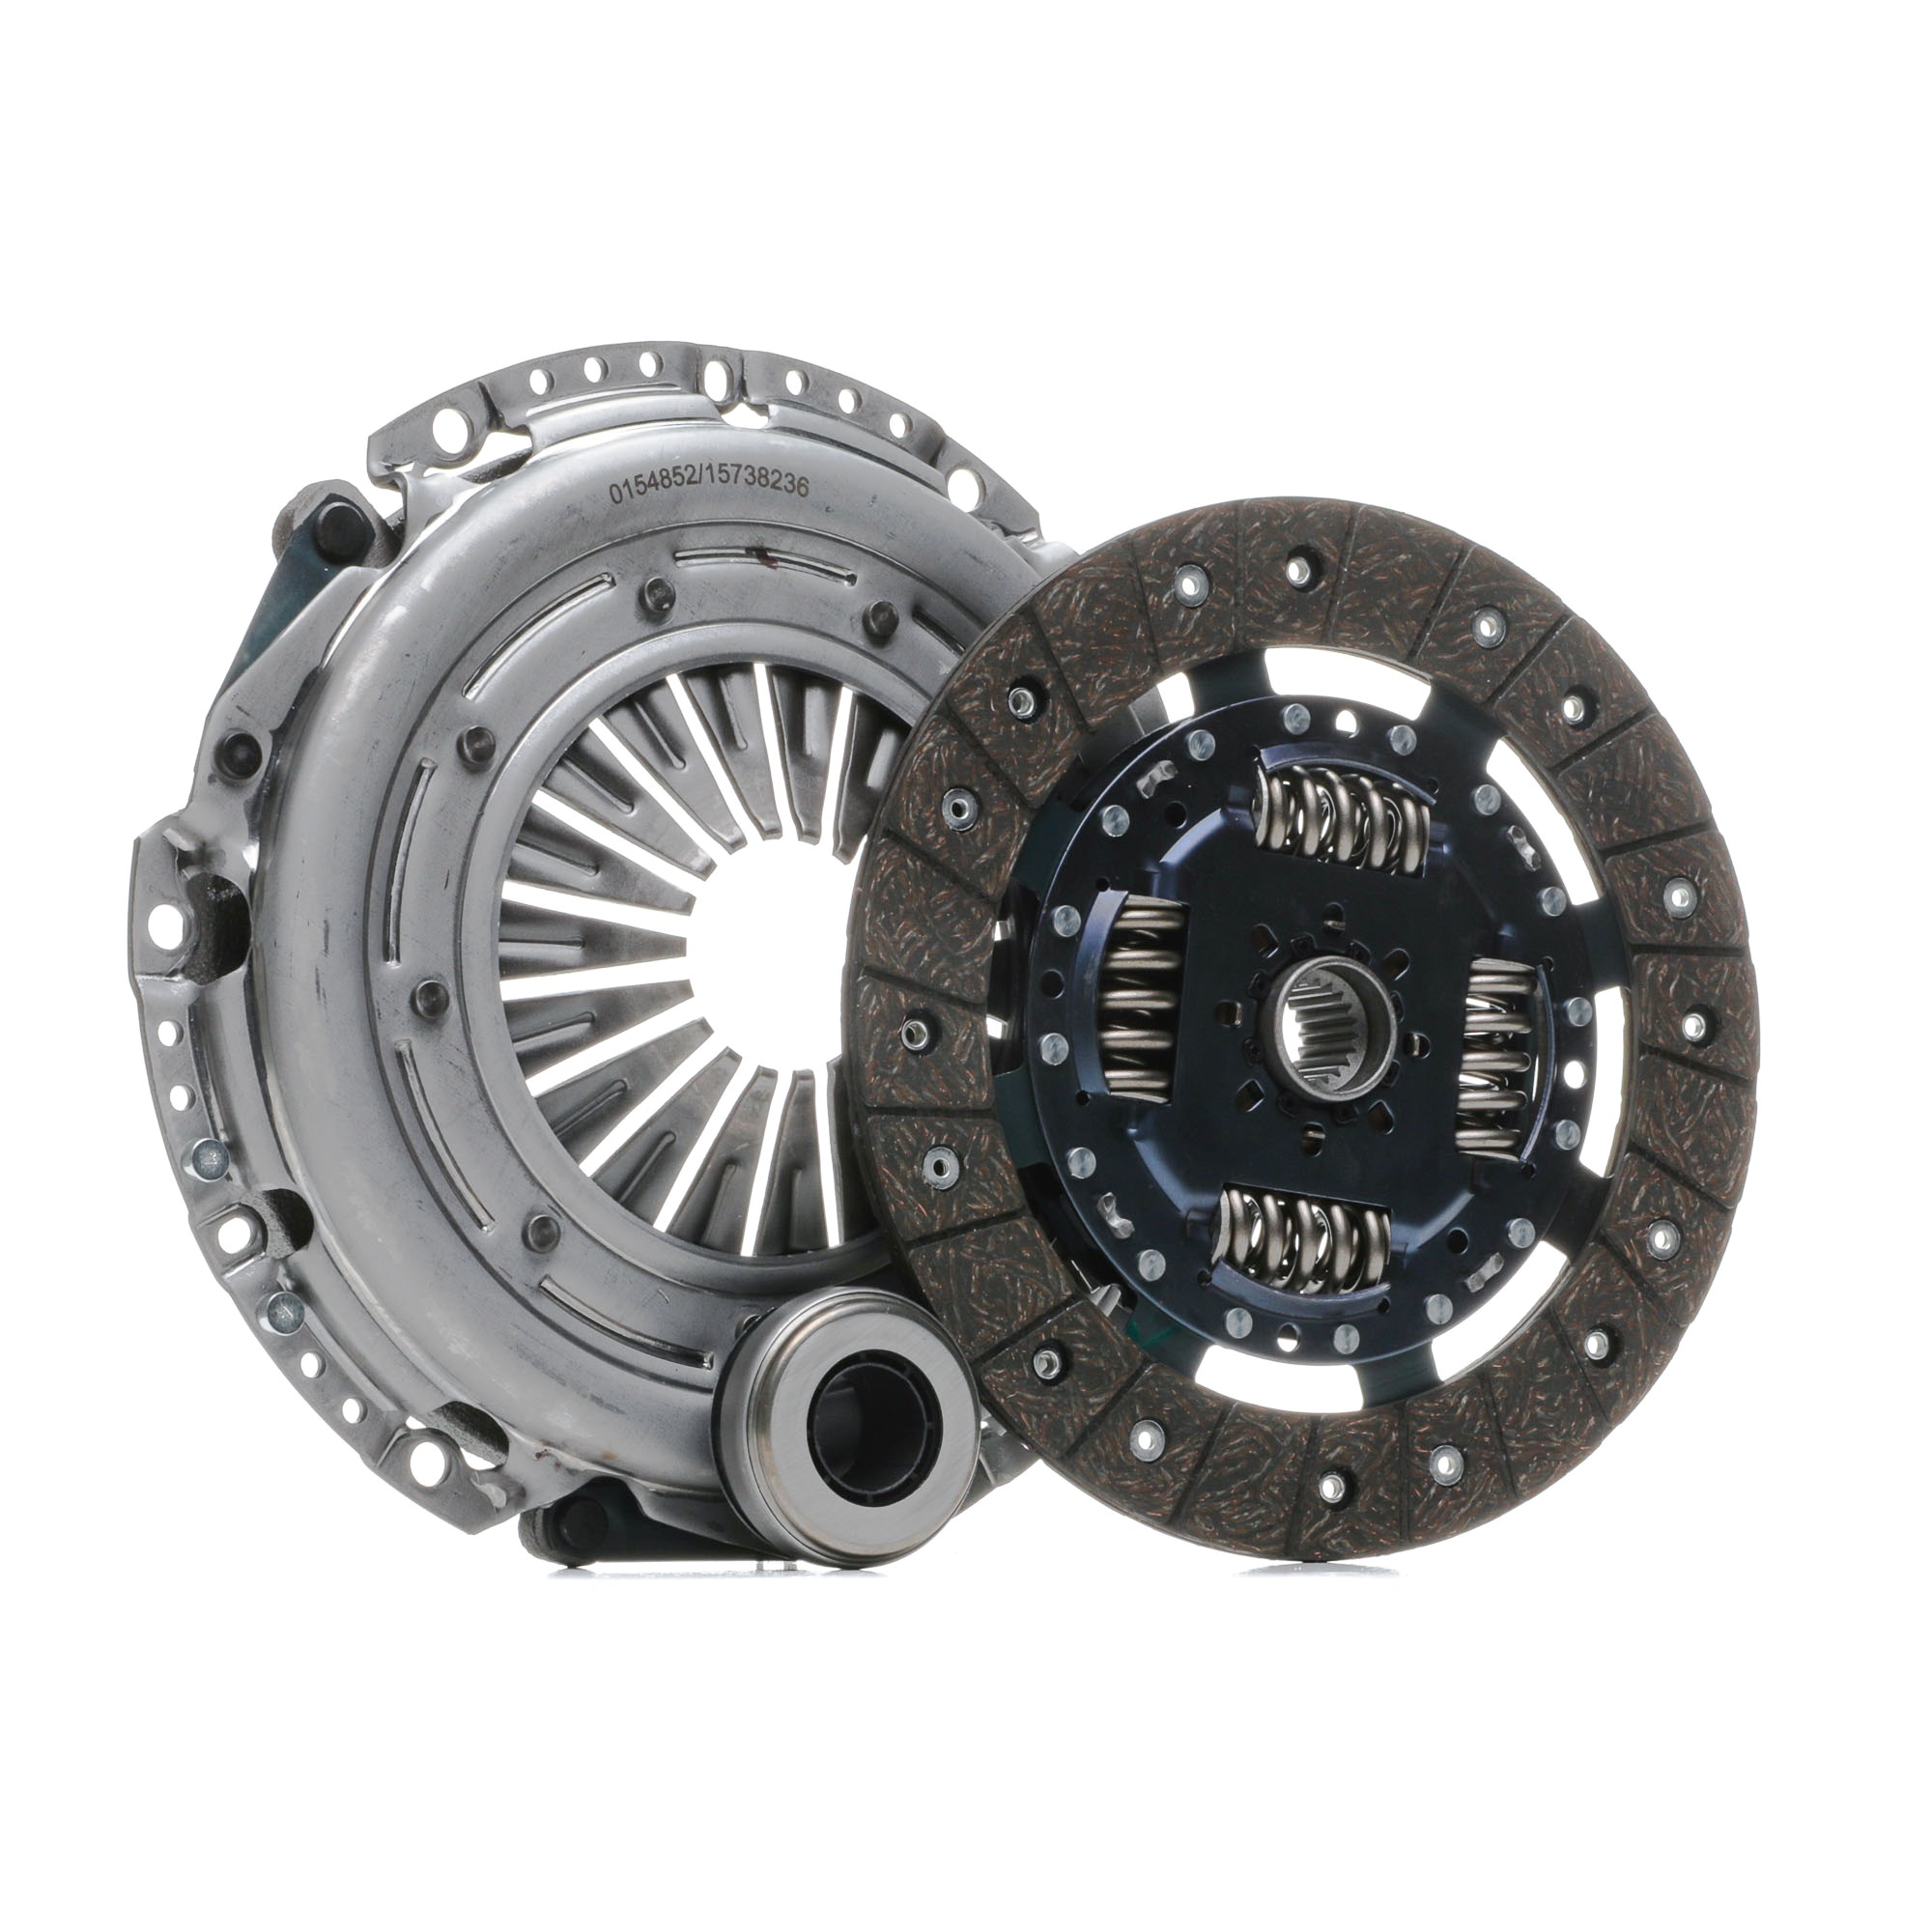 STARK SKCK-0100813 Clutch kit TOYOTA experience and price